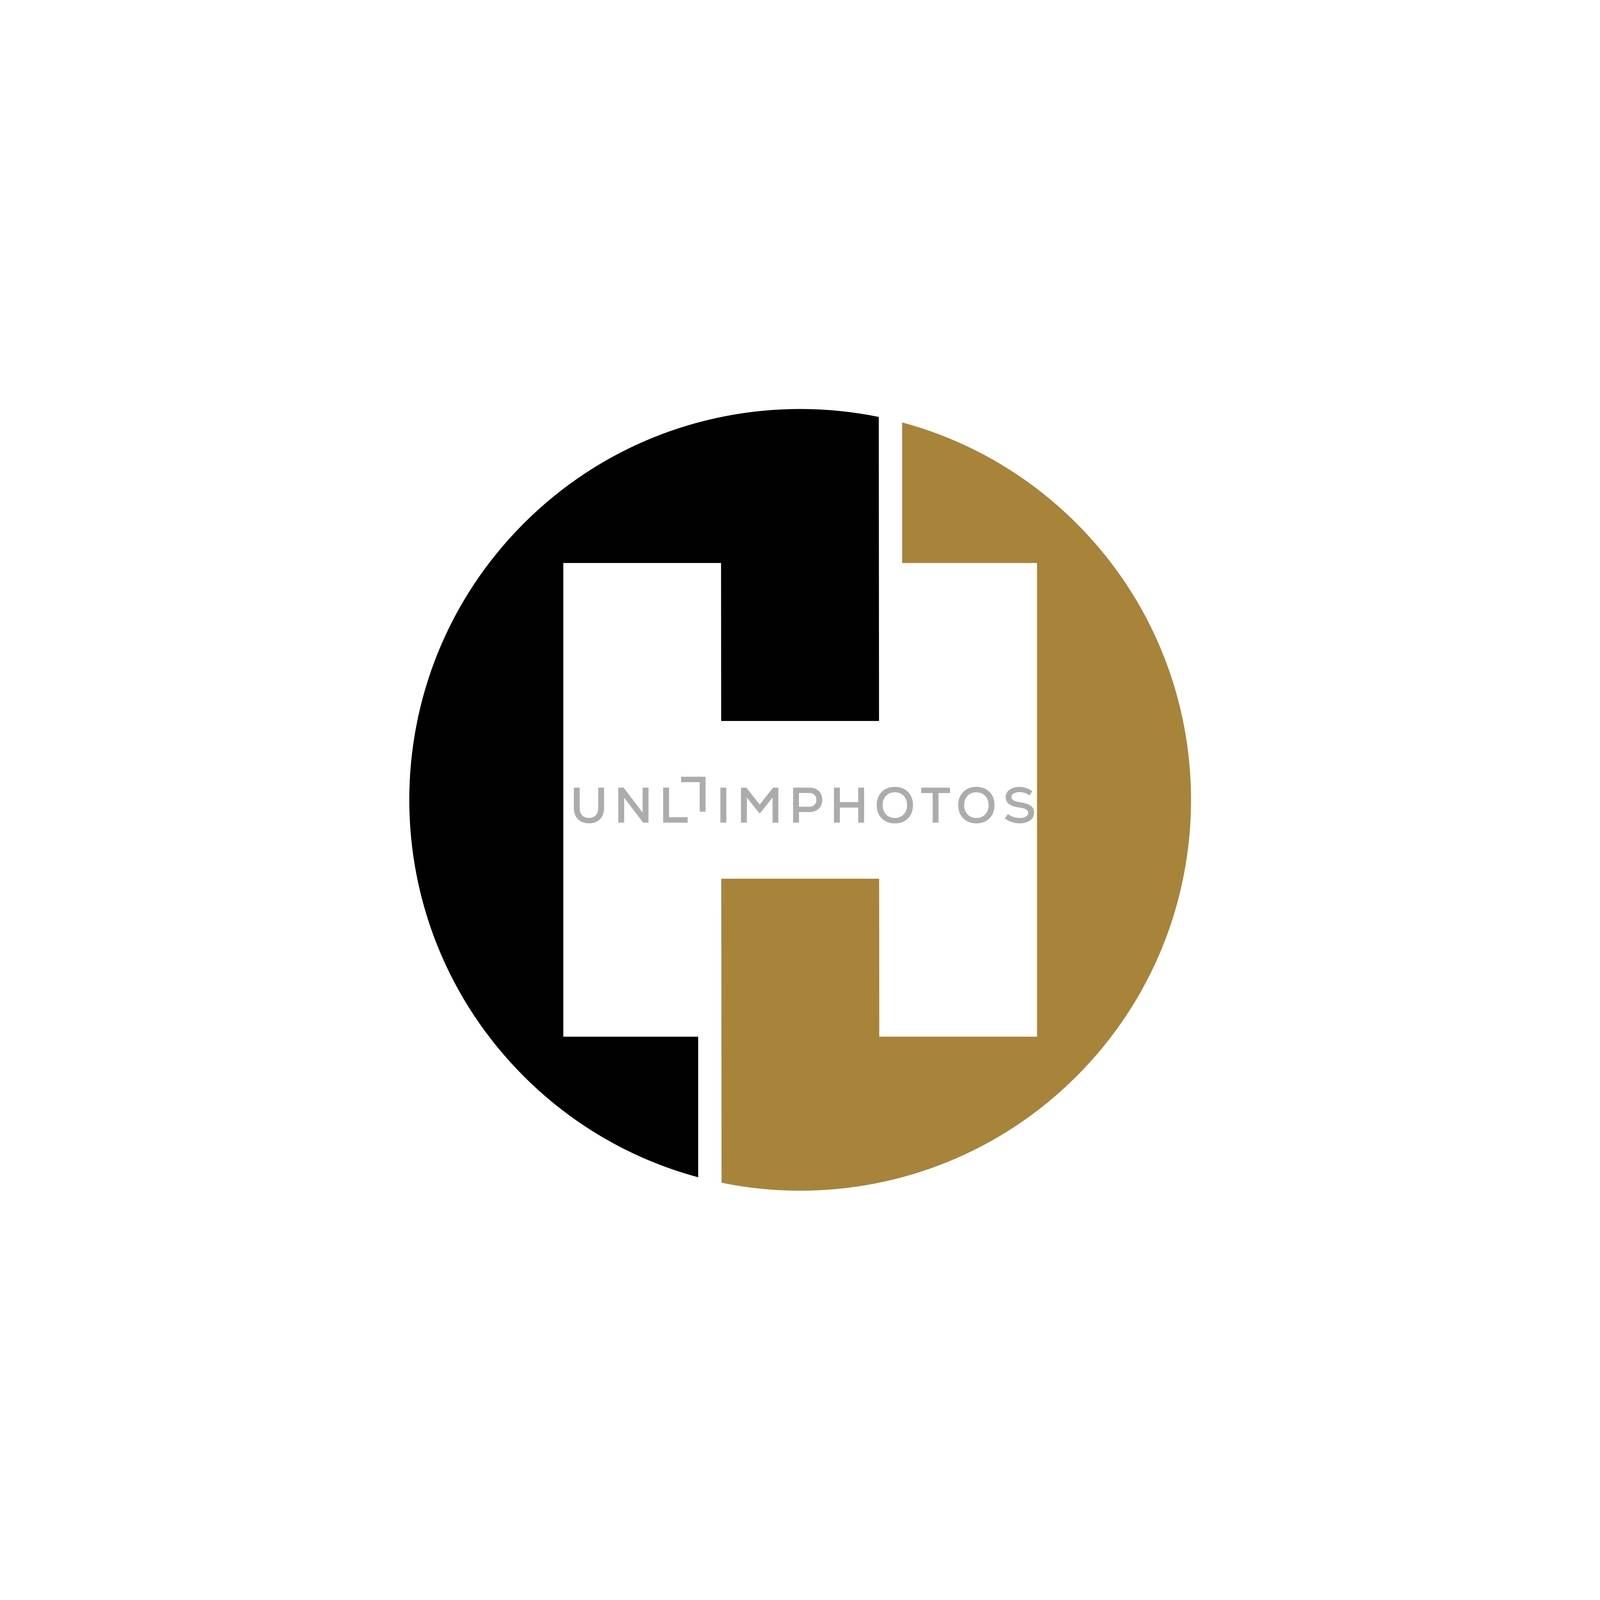 H Letter in circle shape Logo Template Illustration Design. Vector EPS 10. by soponyono1